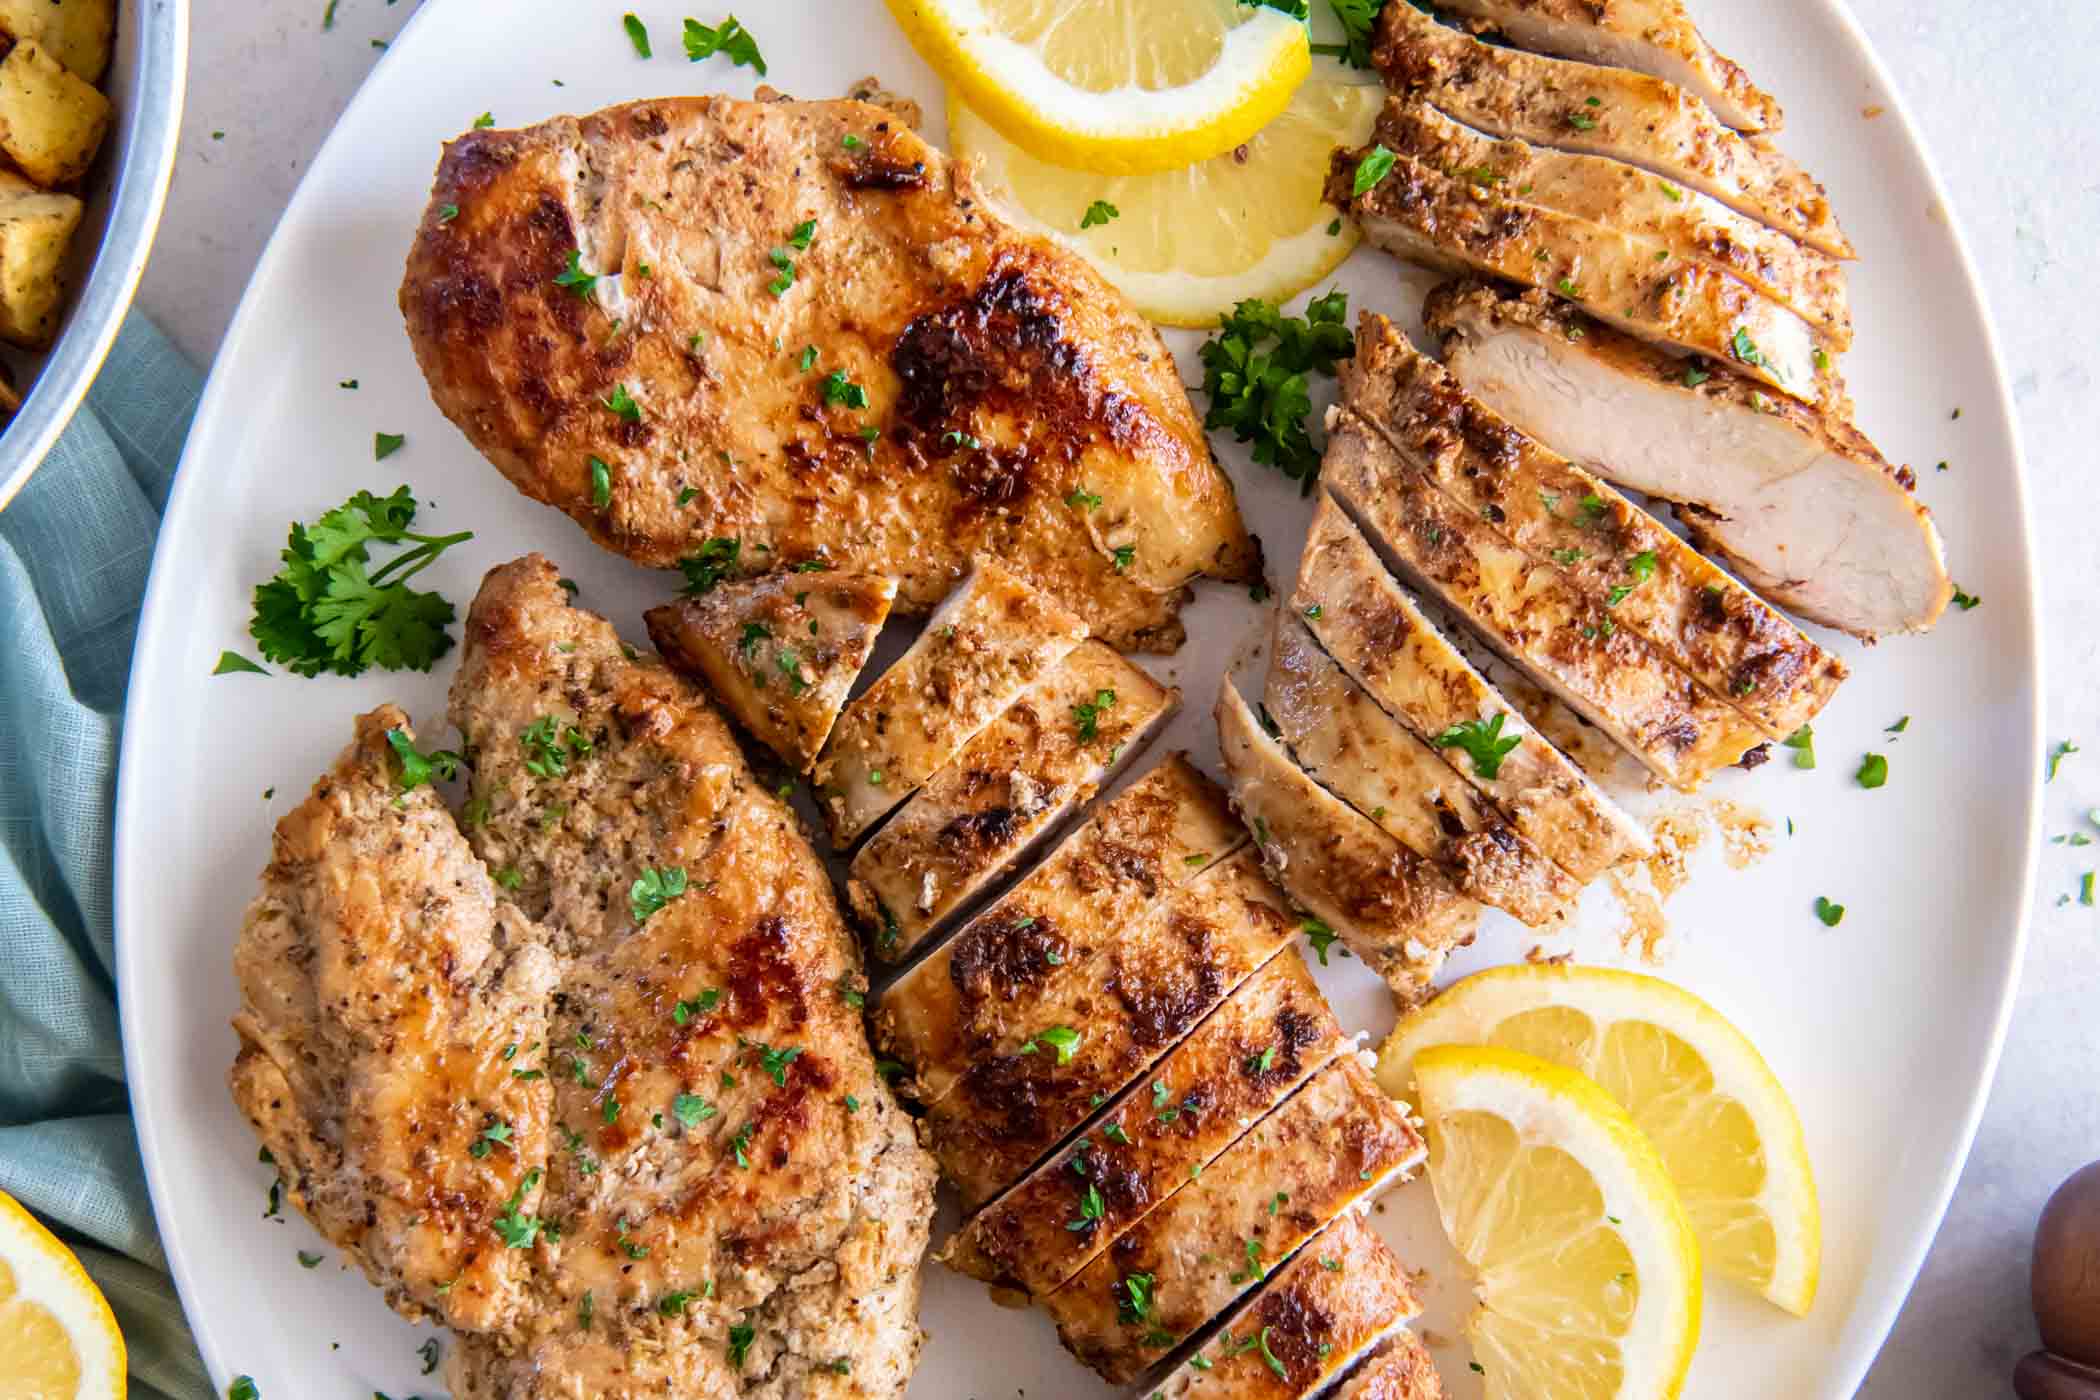 Four cooked Greek chicken breasts on a plate, partially sliced.